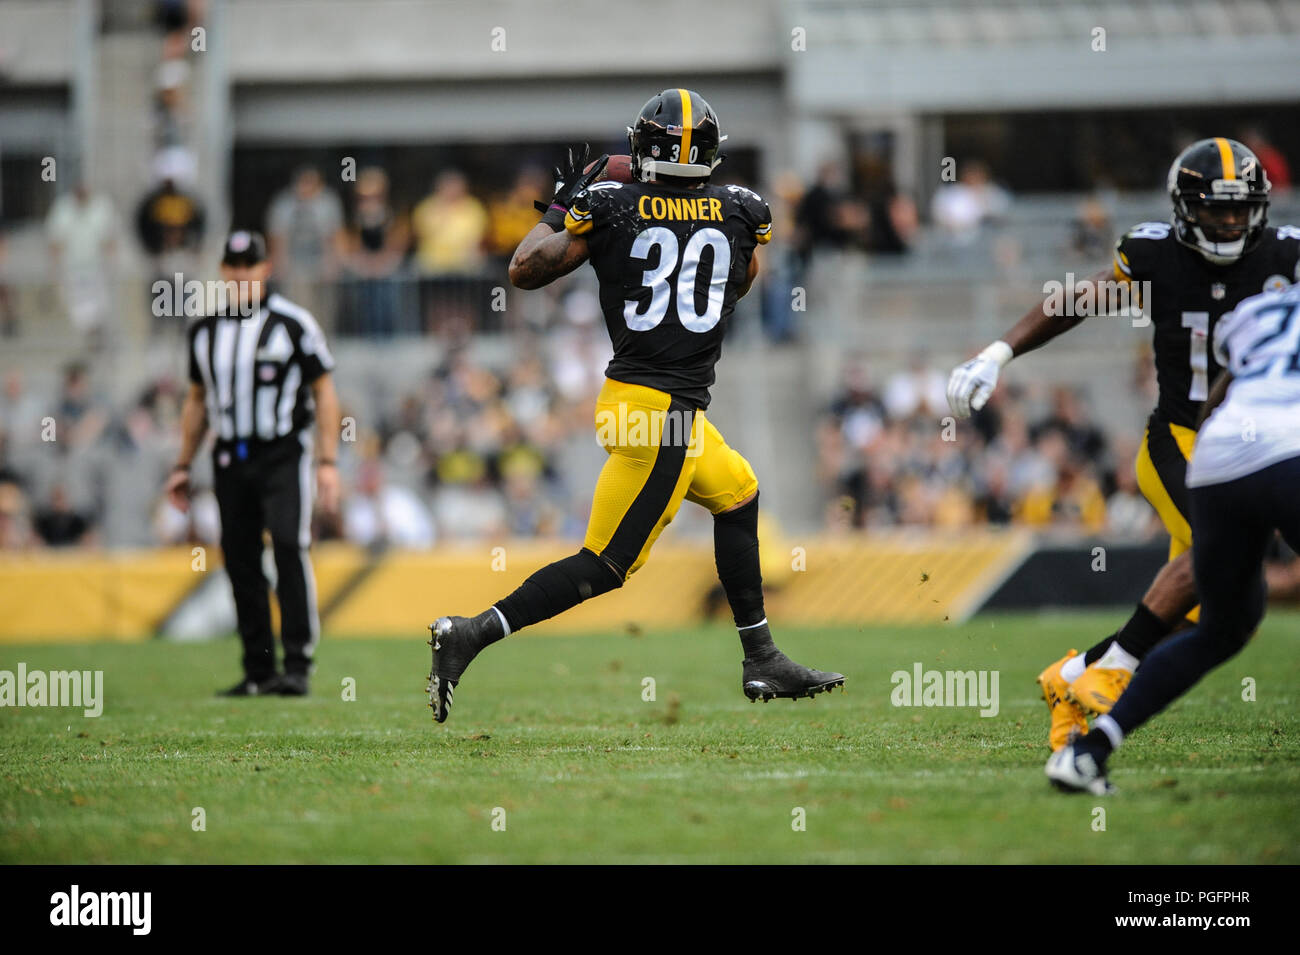 pittsburgh-usa-25-august-2018-steelers-james-conner-30-during-the-pittsburgh-steelers-vs-tennessee-titans-game-at-heinz-field-in-pittsburgh-pa-jason-pohuskicsm-credit-cal-sport-mediaalamy-live-news-PGFPHR.jpg